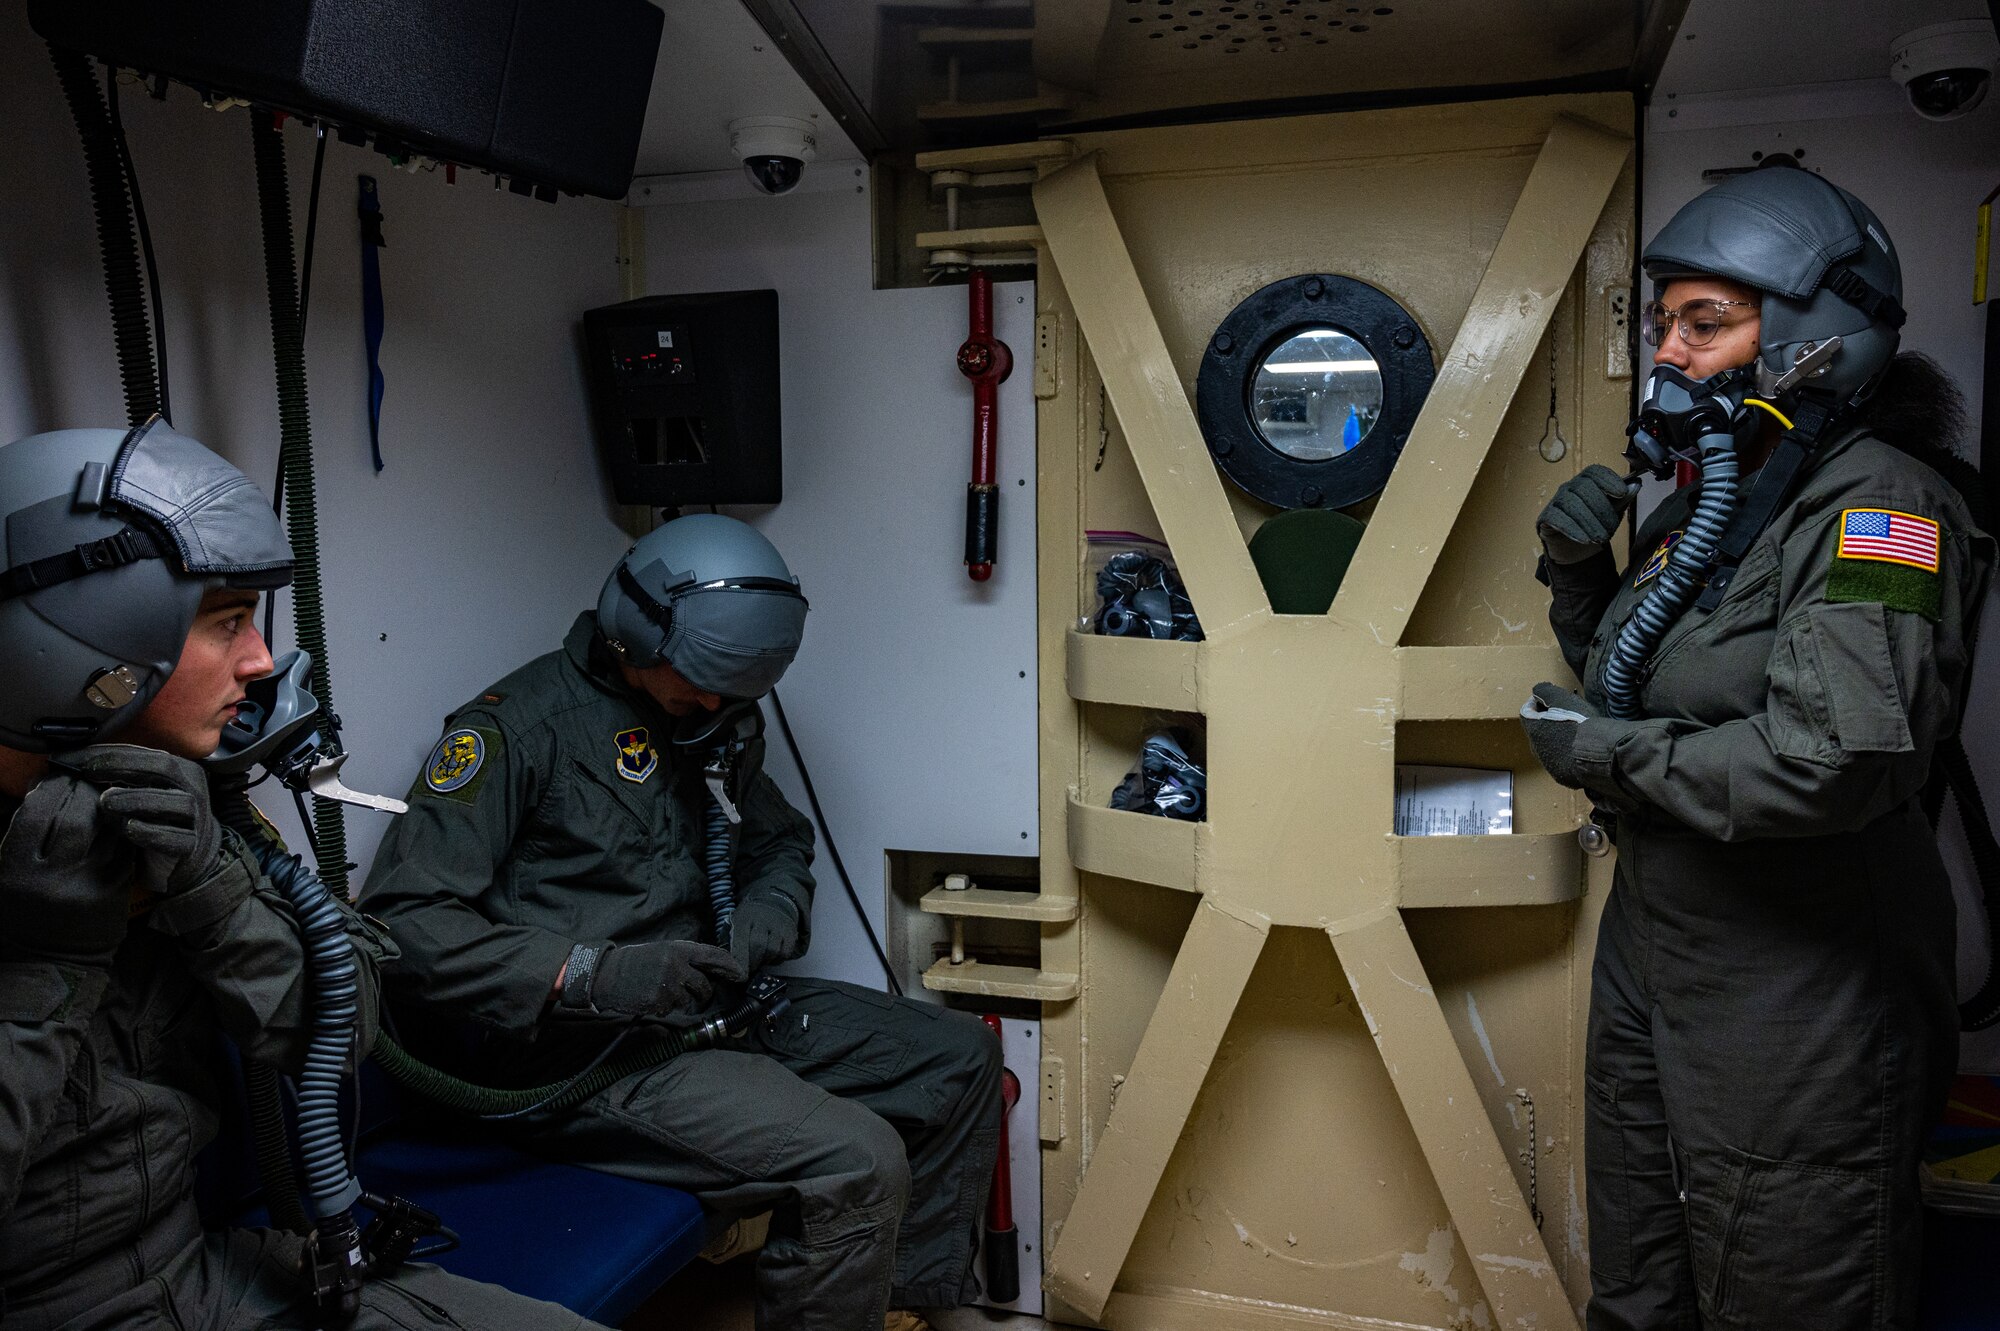 U.S. Air Force Senior Airman Jada Peters instructs students how to correctly use aircraft equipment in the altitude chamber at Laughlin Air Force Base, Texas, on Feb. 24, 2023. The altitude chamber is one of the first training steps for all new pilots and aircrew to demonstrate and know the symptoms of hypoxia. (U.S. Air Force photo by Senior Airman David Phaff)